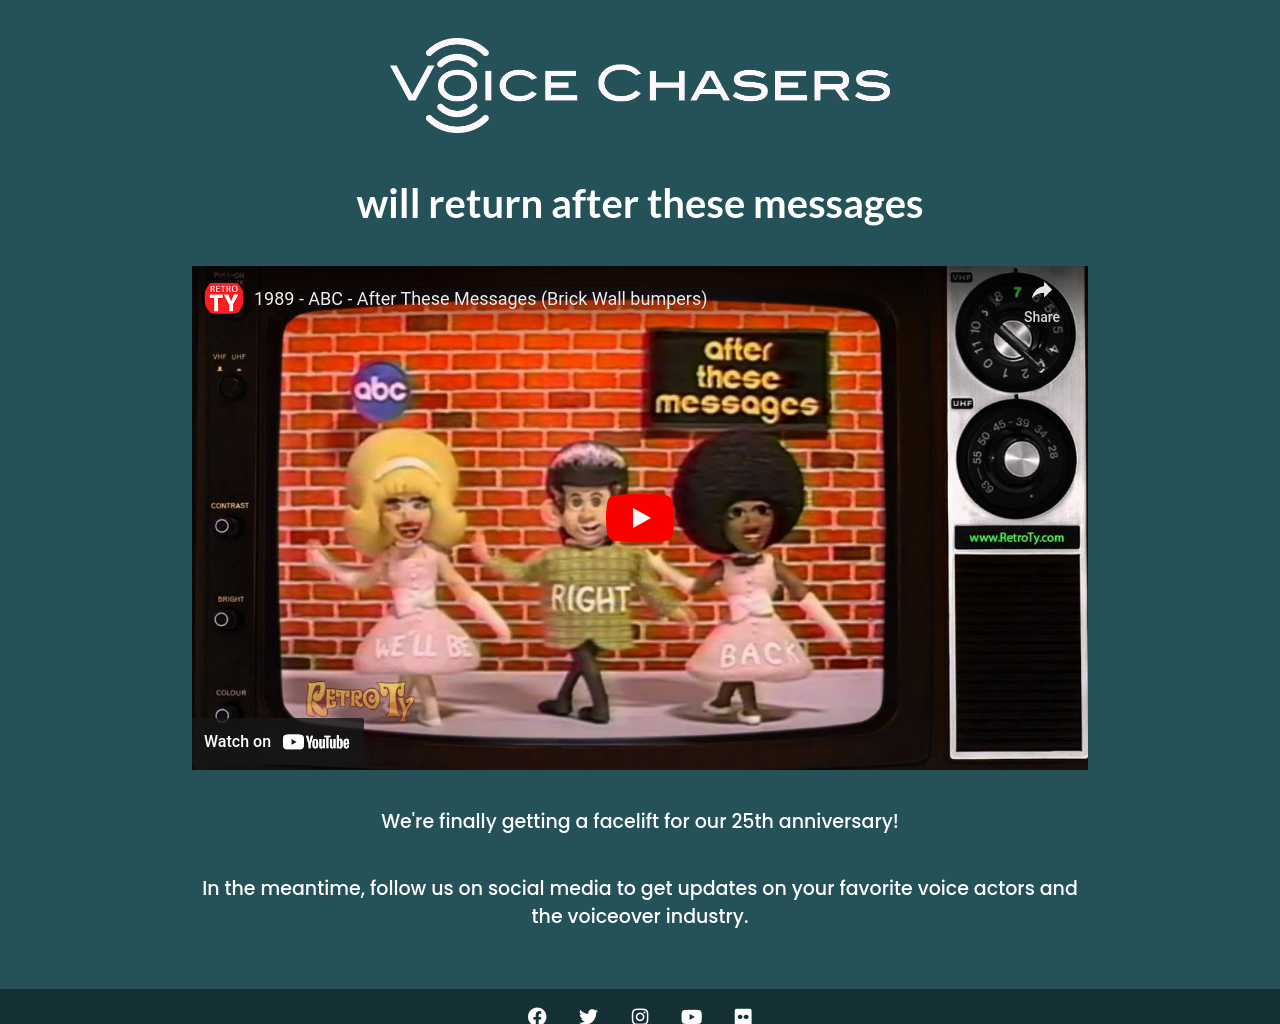 voicechasers.com